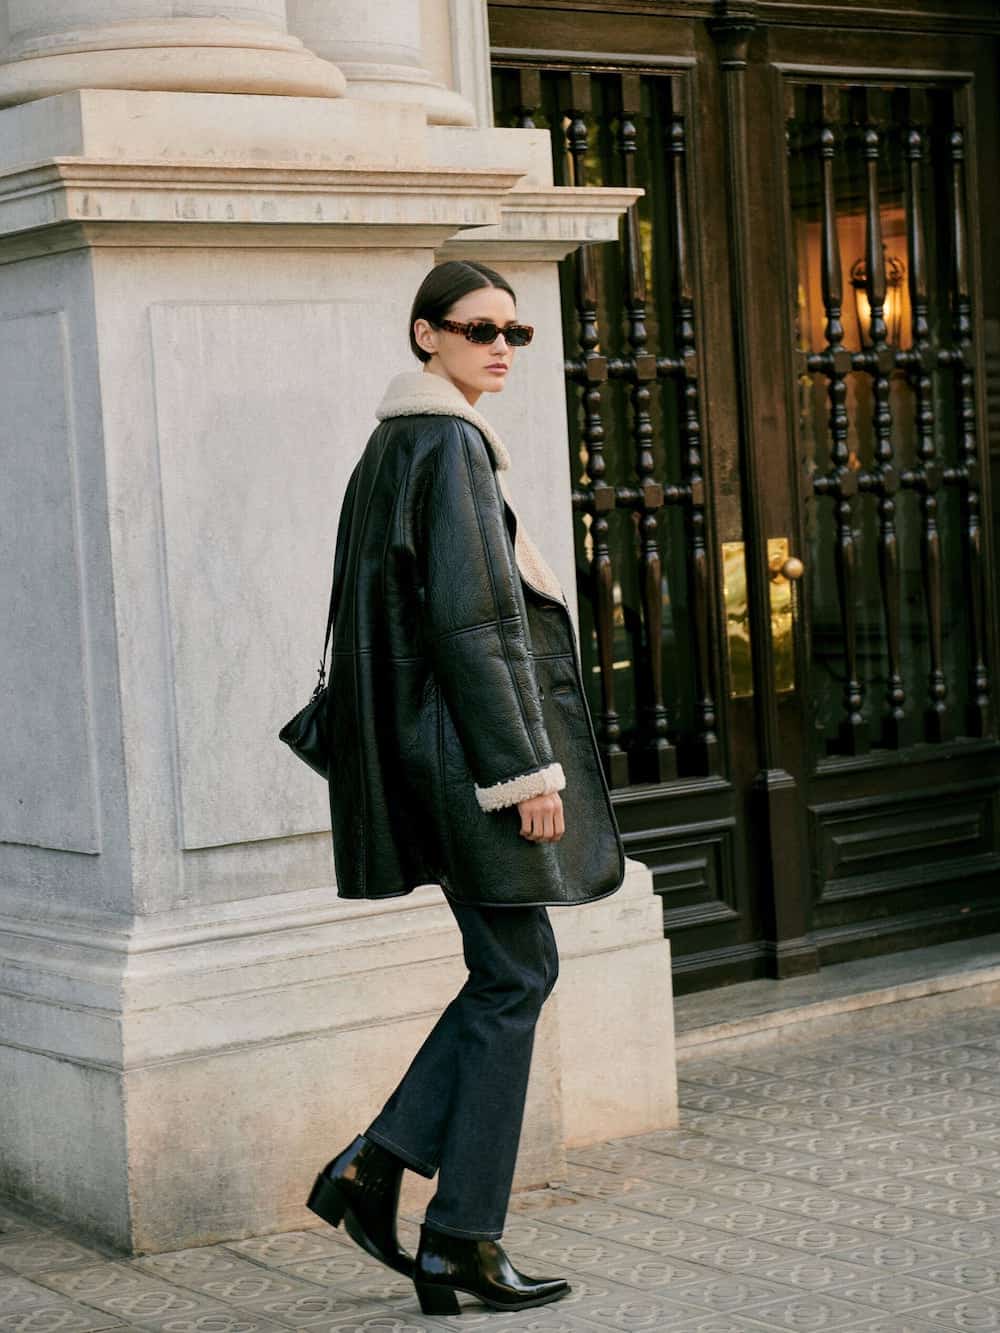 image of a woman walking down the sidewalk in a black leather and shearling jacket, dark jeans, and boots